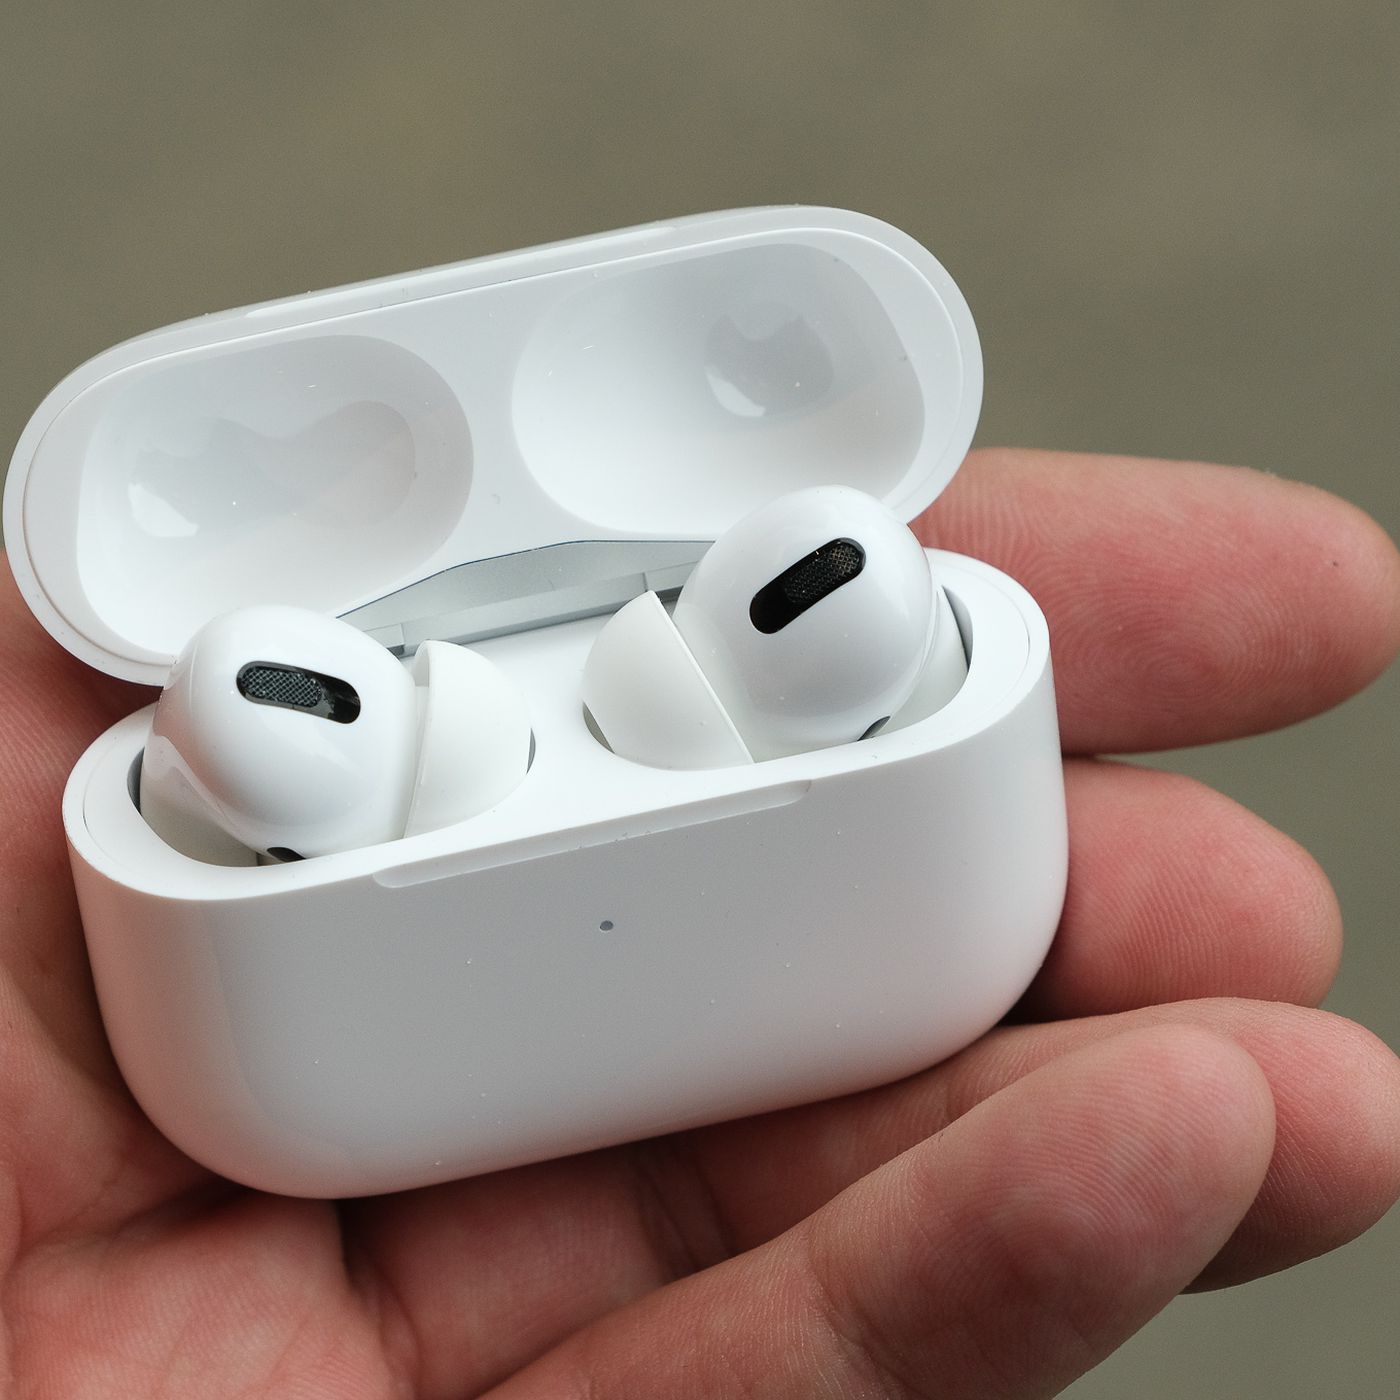 AirPods Pro hands-on: Apple's noise canceling earbuds are big on ...